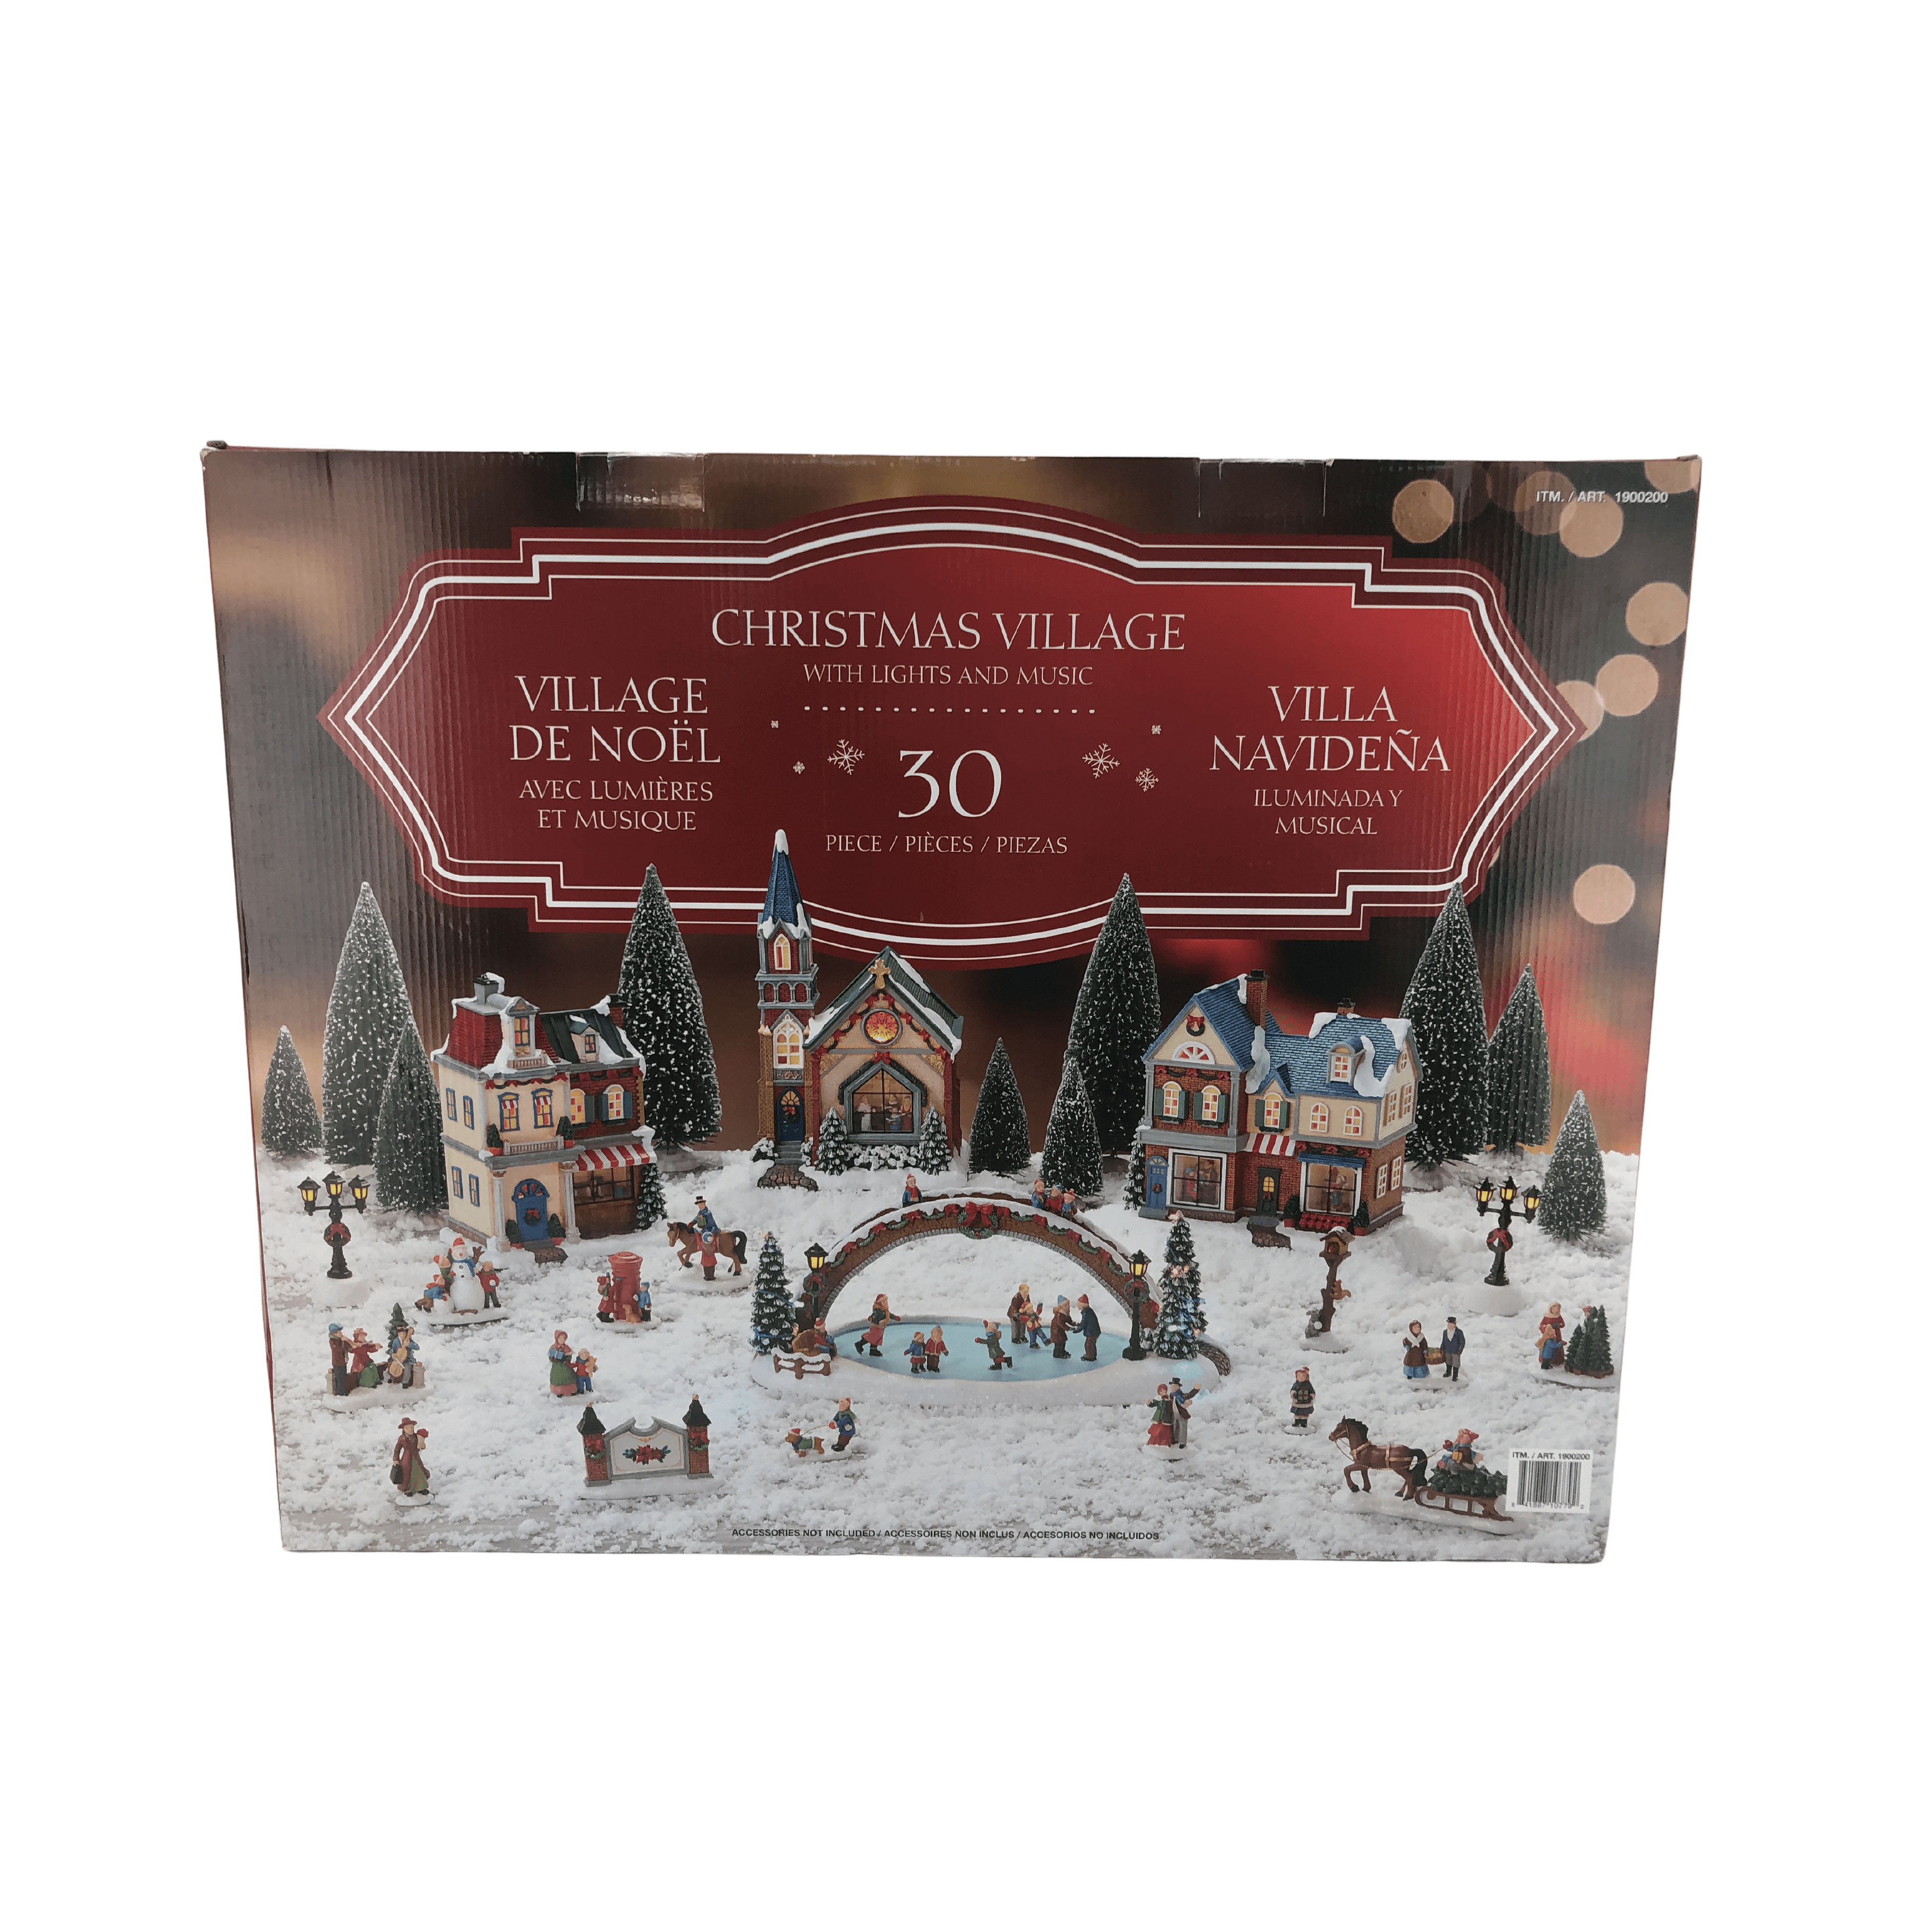 Musical Light Up Christmas Village &#124 30 Piece &#124 Plays 8 Classical Christmas Songs